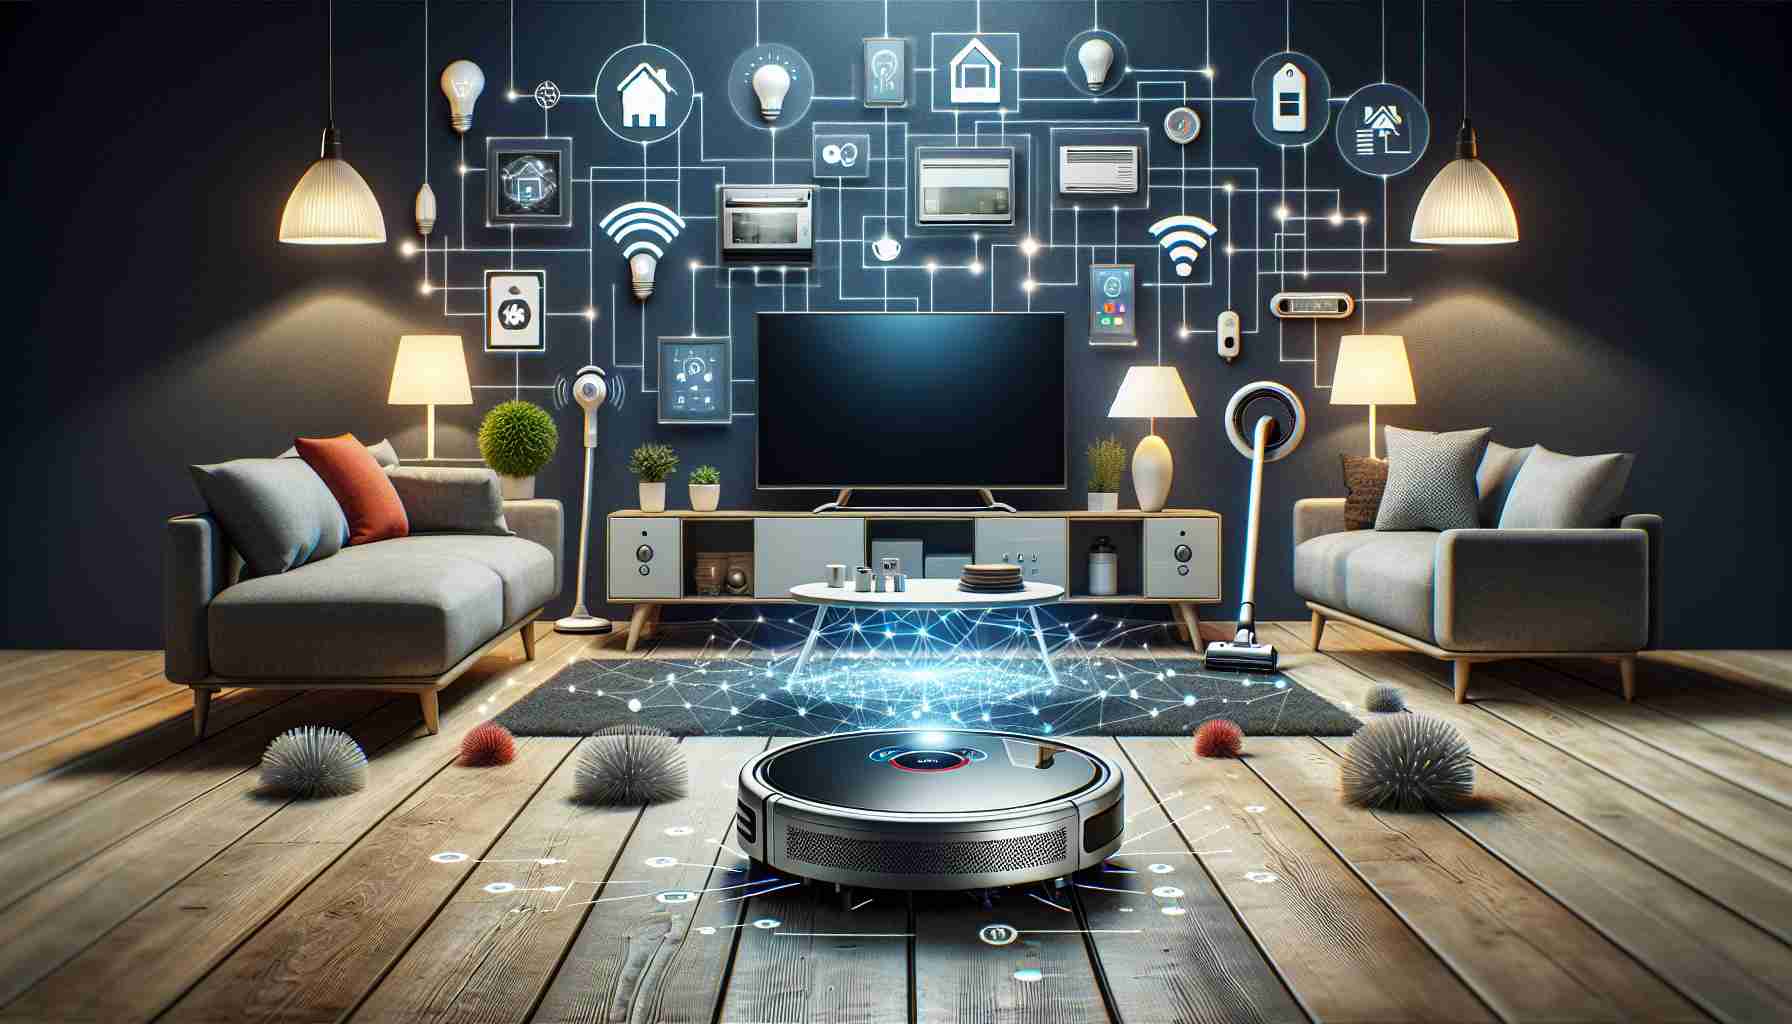 Advancements in Smart Home Ecosystems: Robot Vacuums Join the Movement